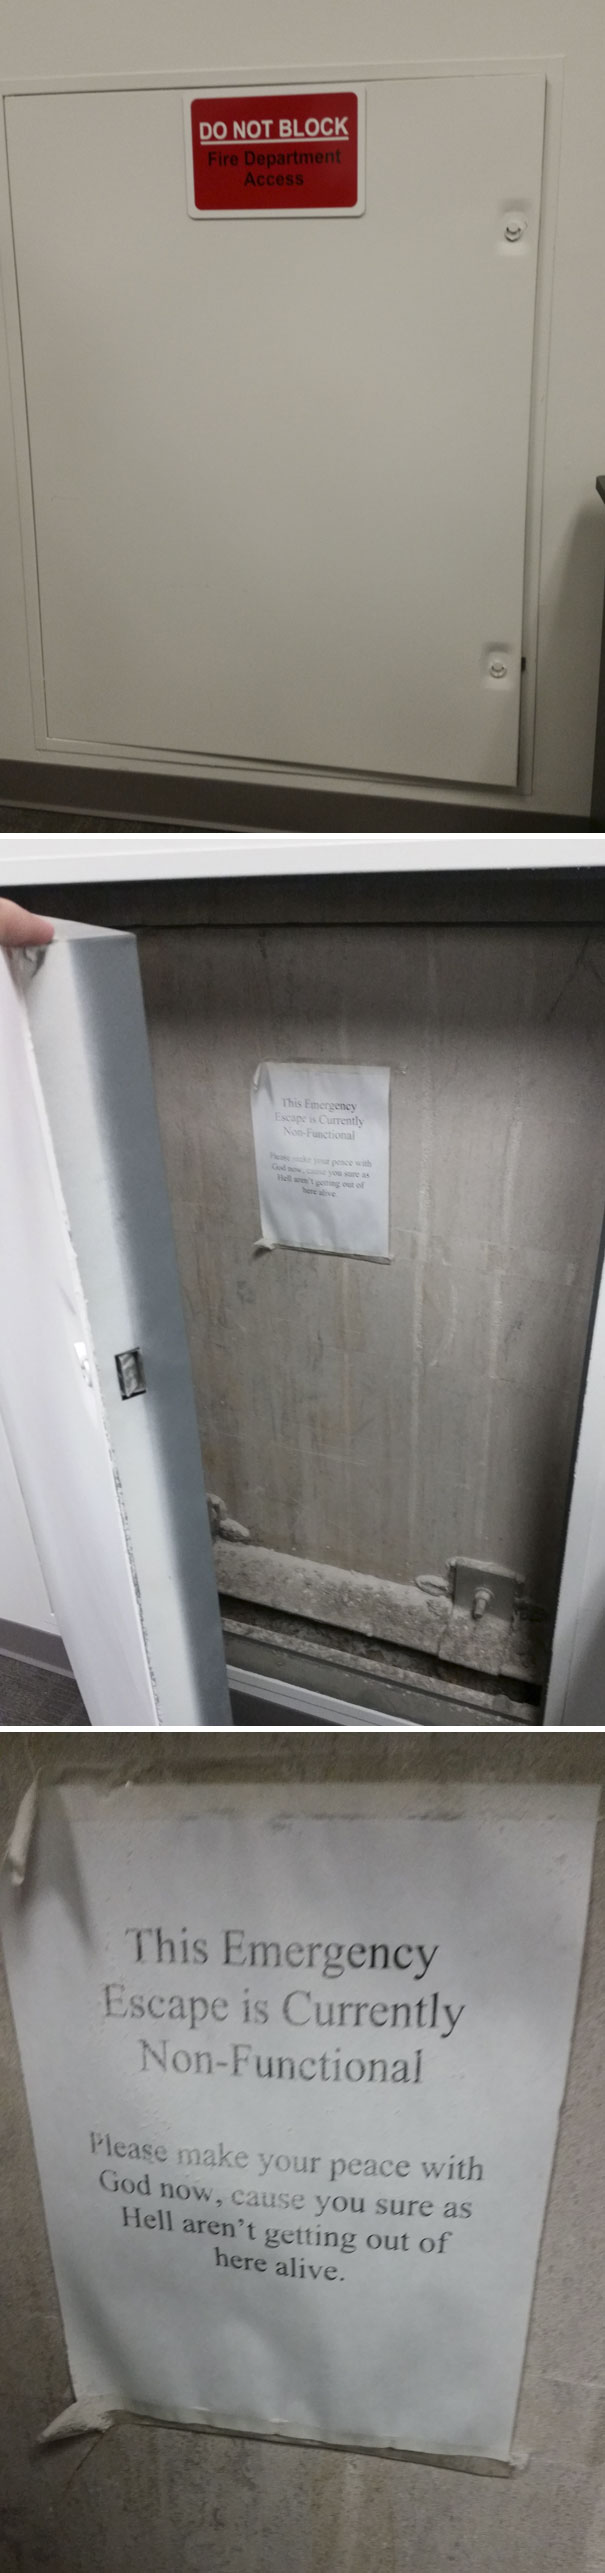 We've Been Told A Shooting Occurred At The University Of South Carolina Where I Work. We Have A Door In The Back Of Our Office For Emergency Fire Department Access, And We Figured We'd Open It And Check It Out In Case We Need An Escape Route